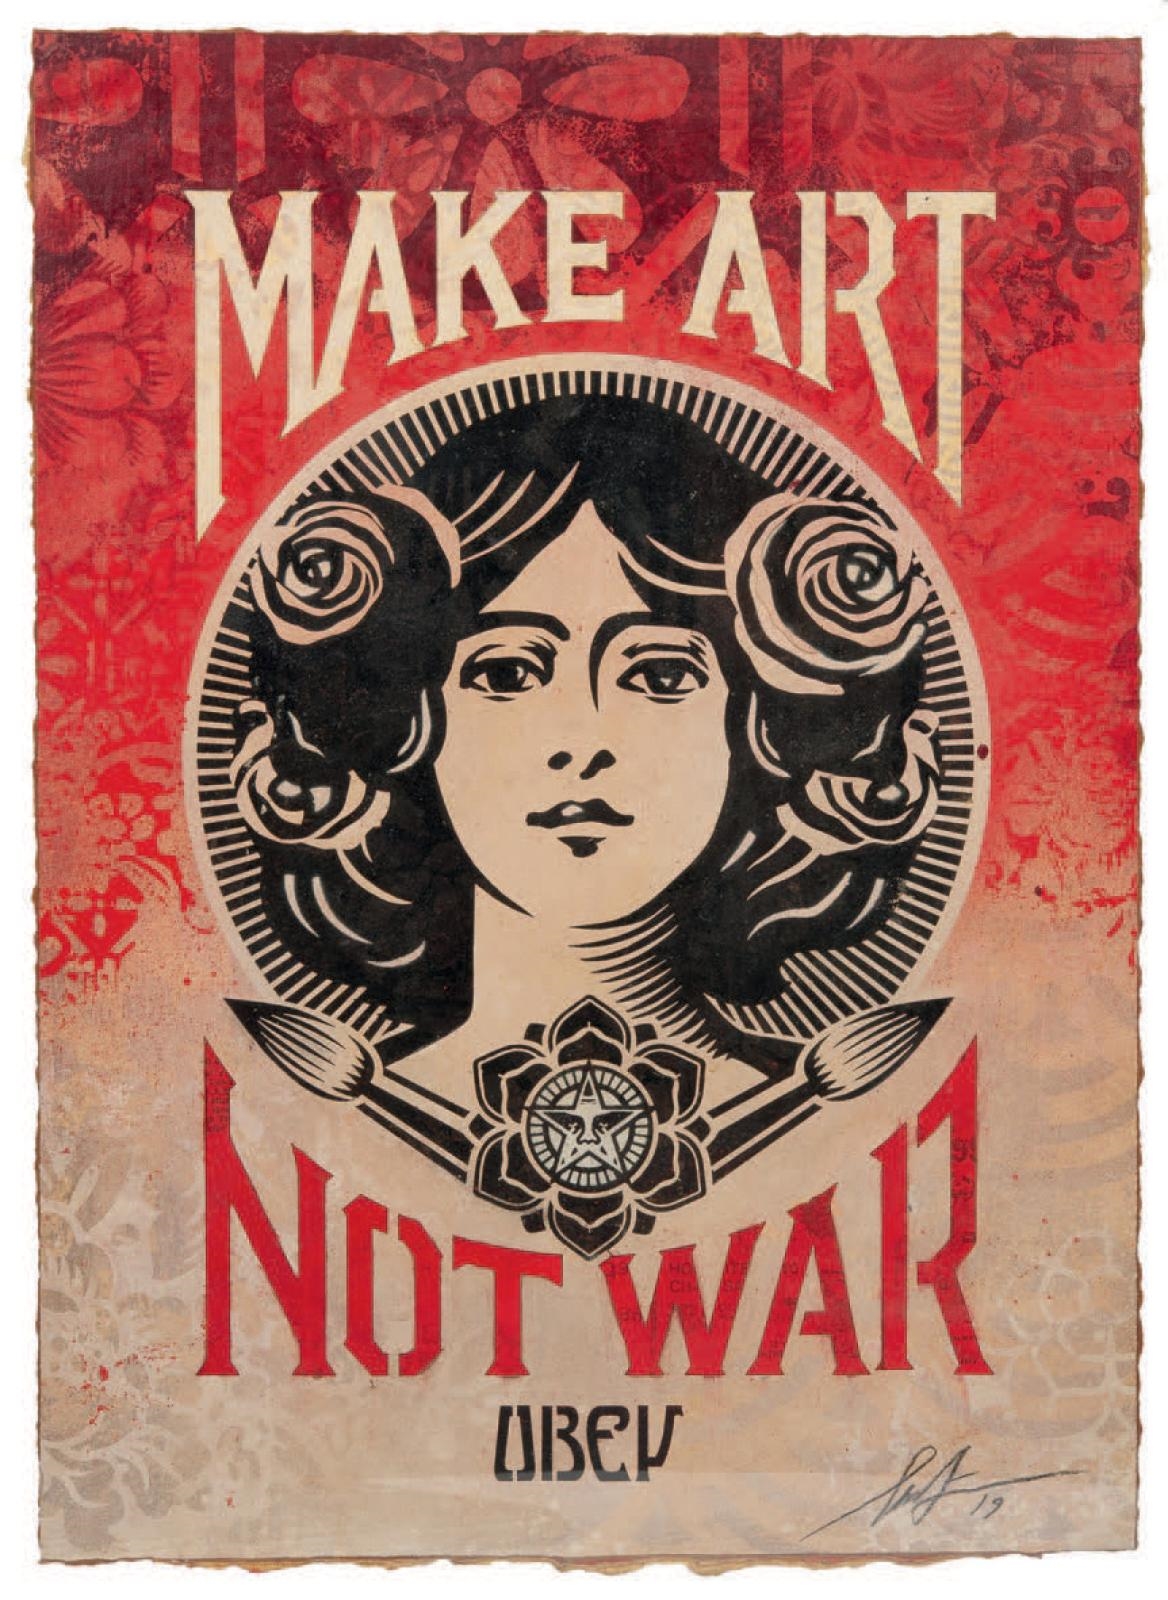 Artwork by Shepard Fairey, Make Art not War, Made of Stencil of aerosol paint and collage on paper